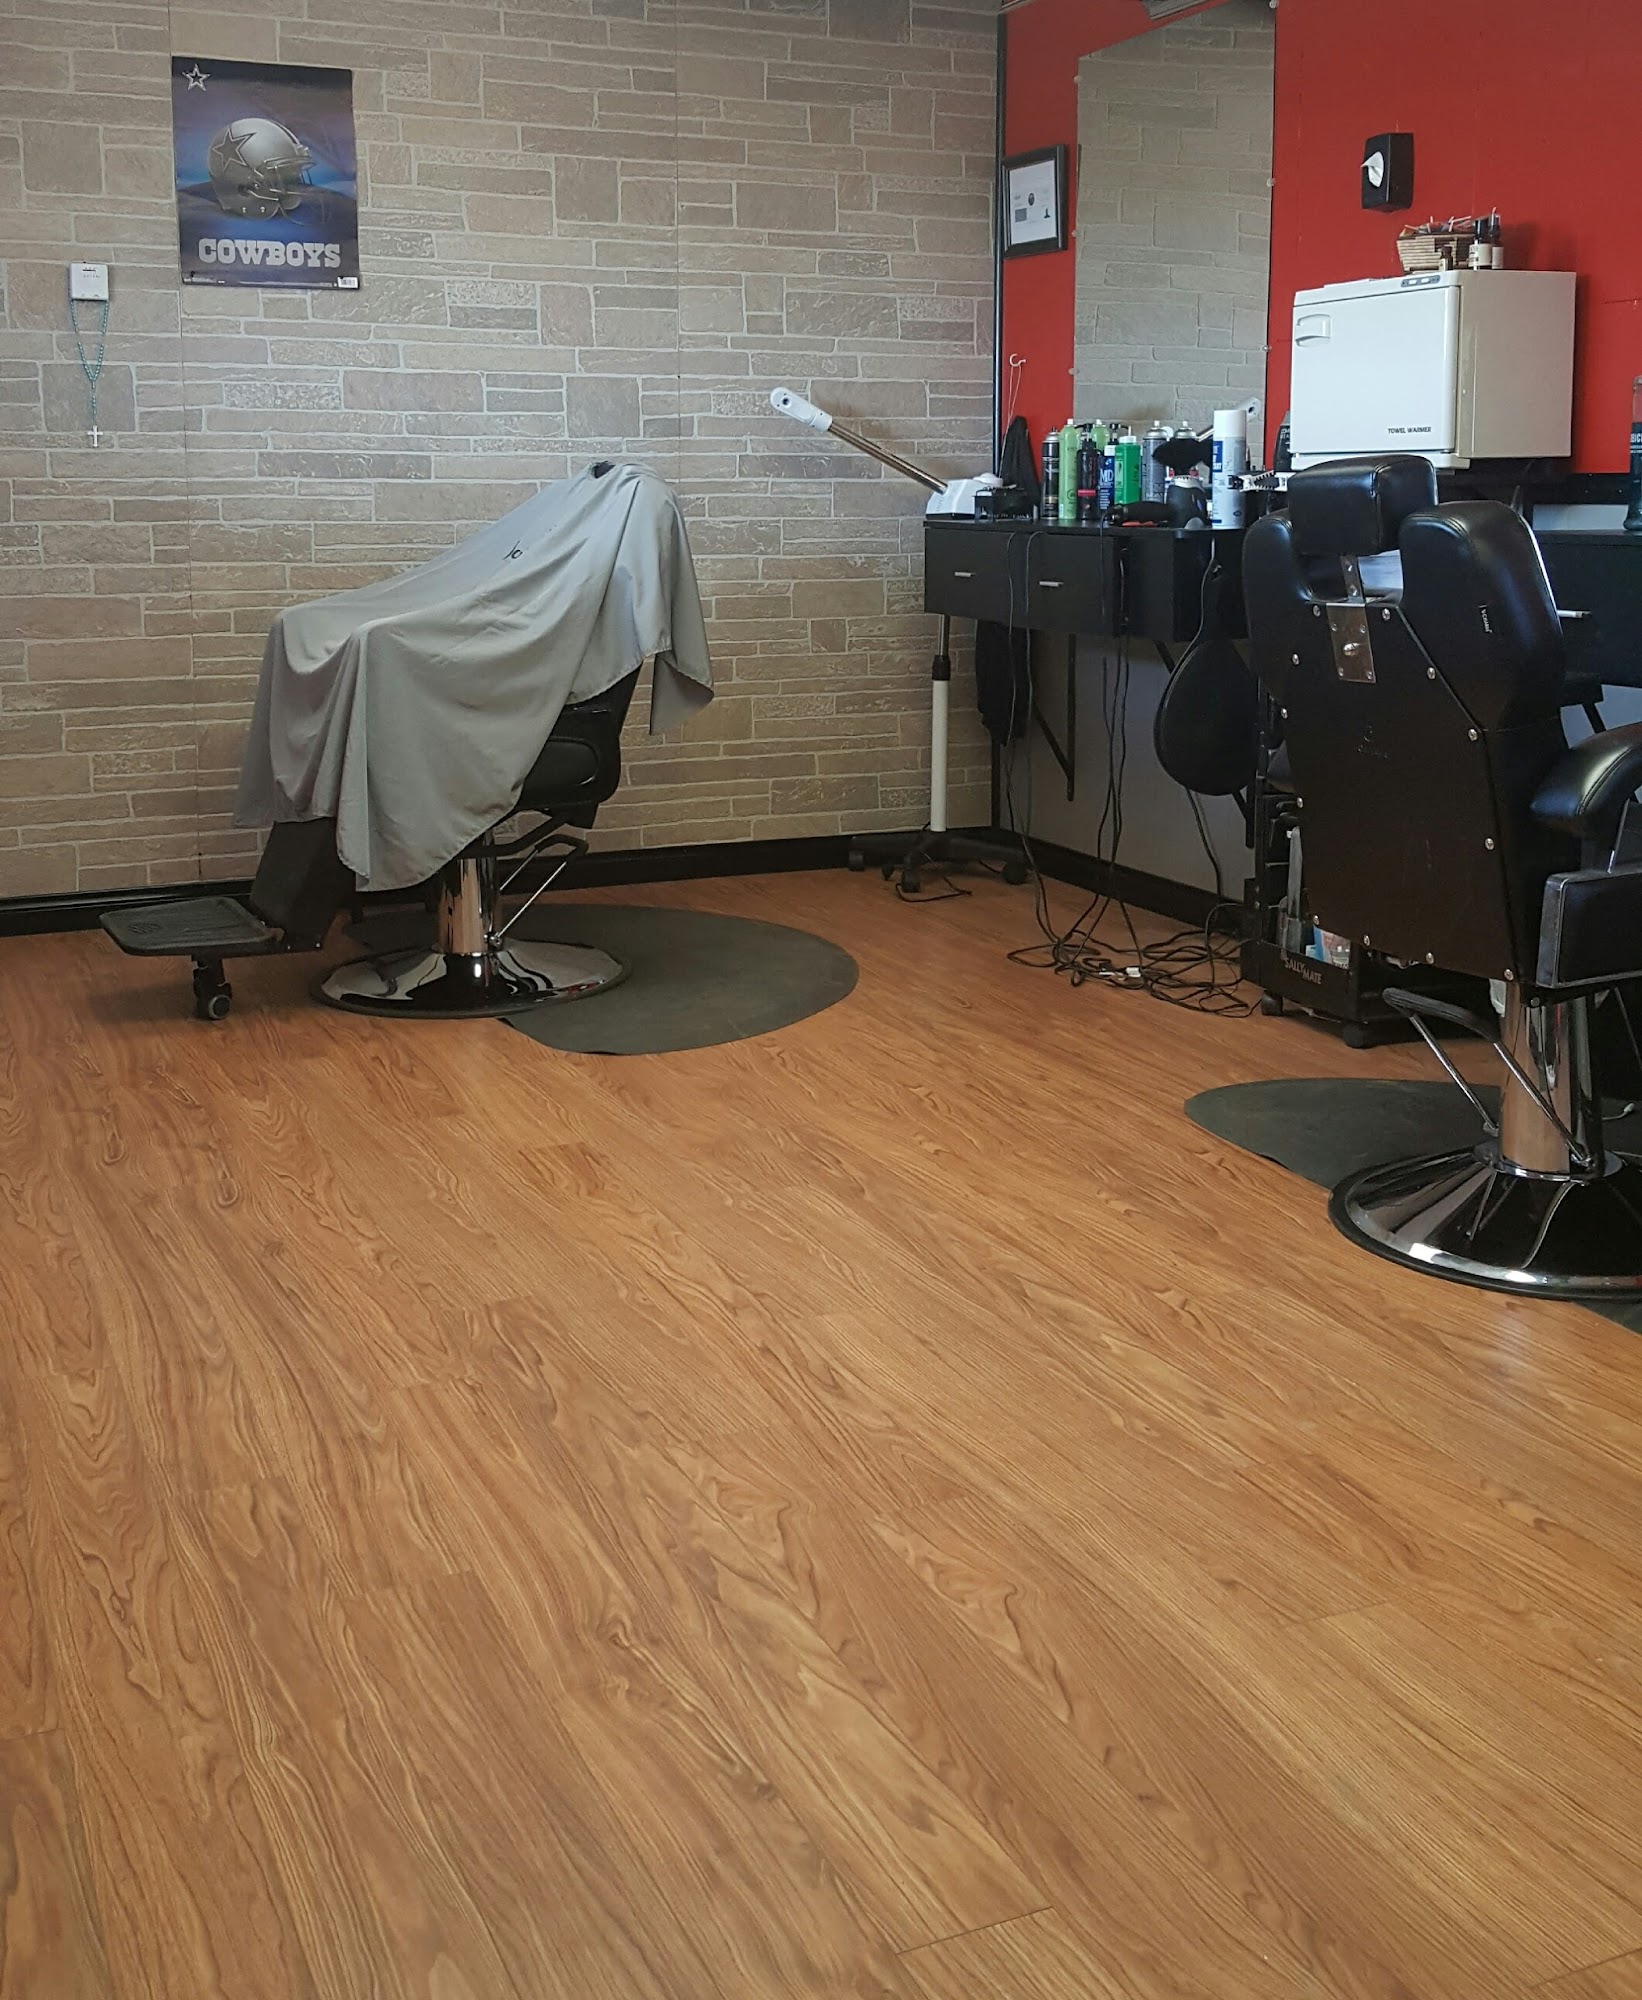 HAIR STUDIO 371 (Formerly known as Phil's Barber Shop)